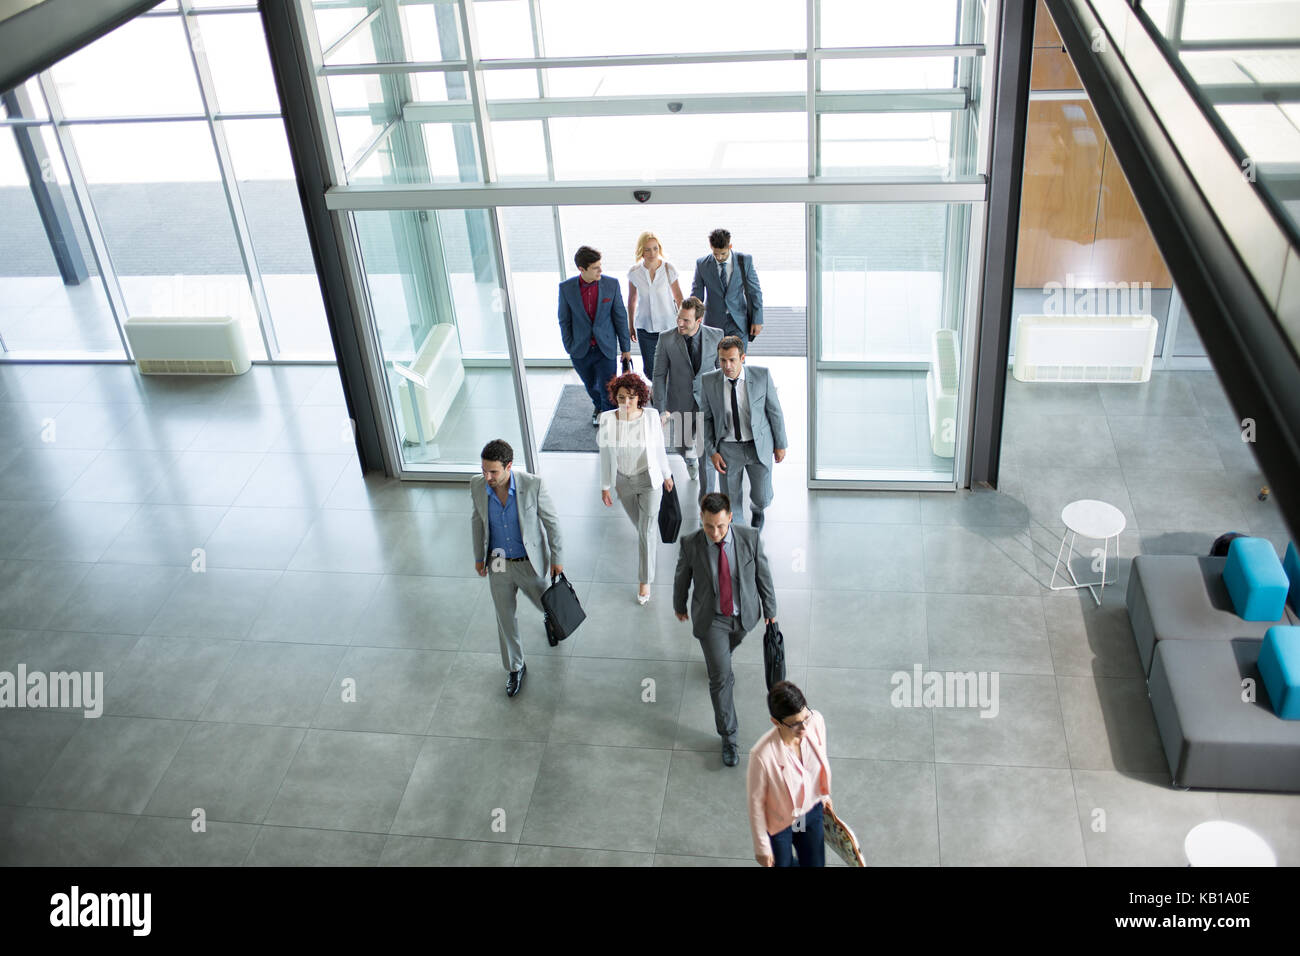 Group of professional business people walking on the way in building Stock Photo